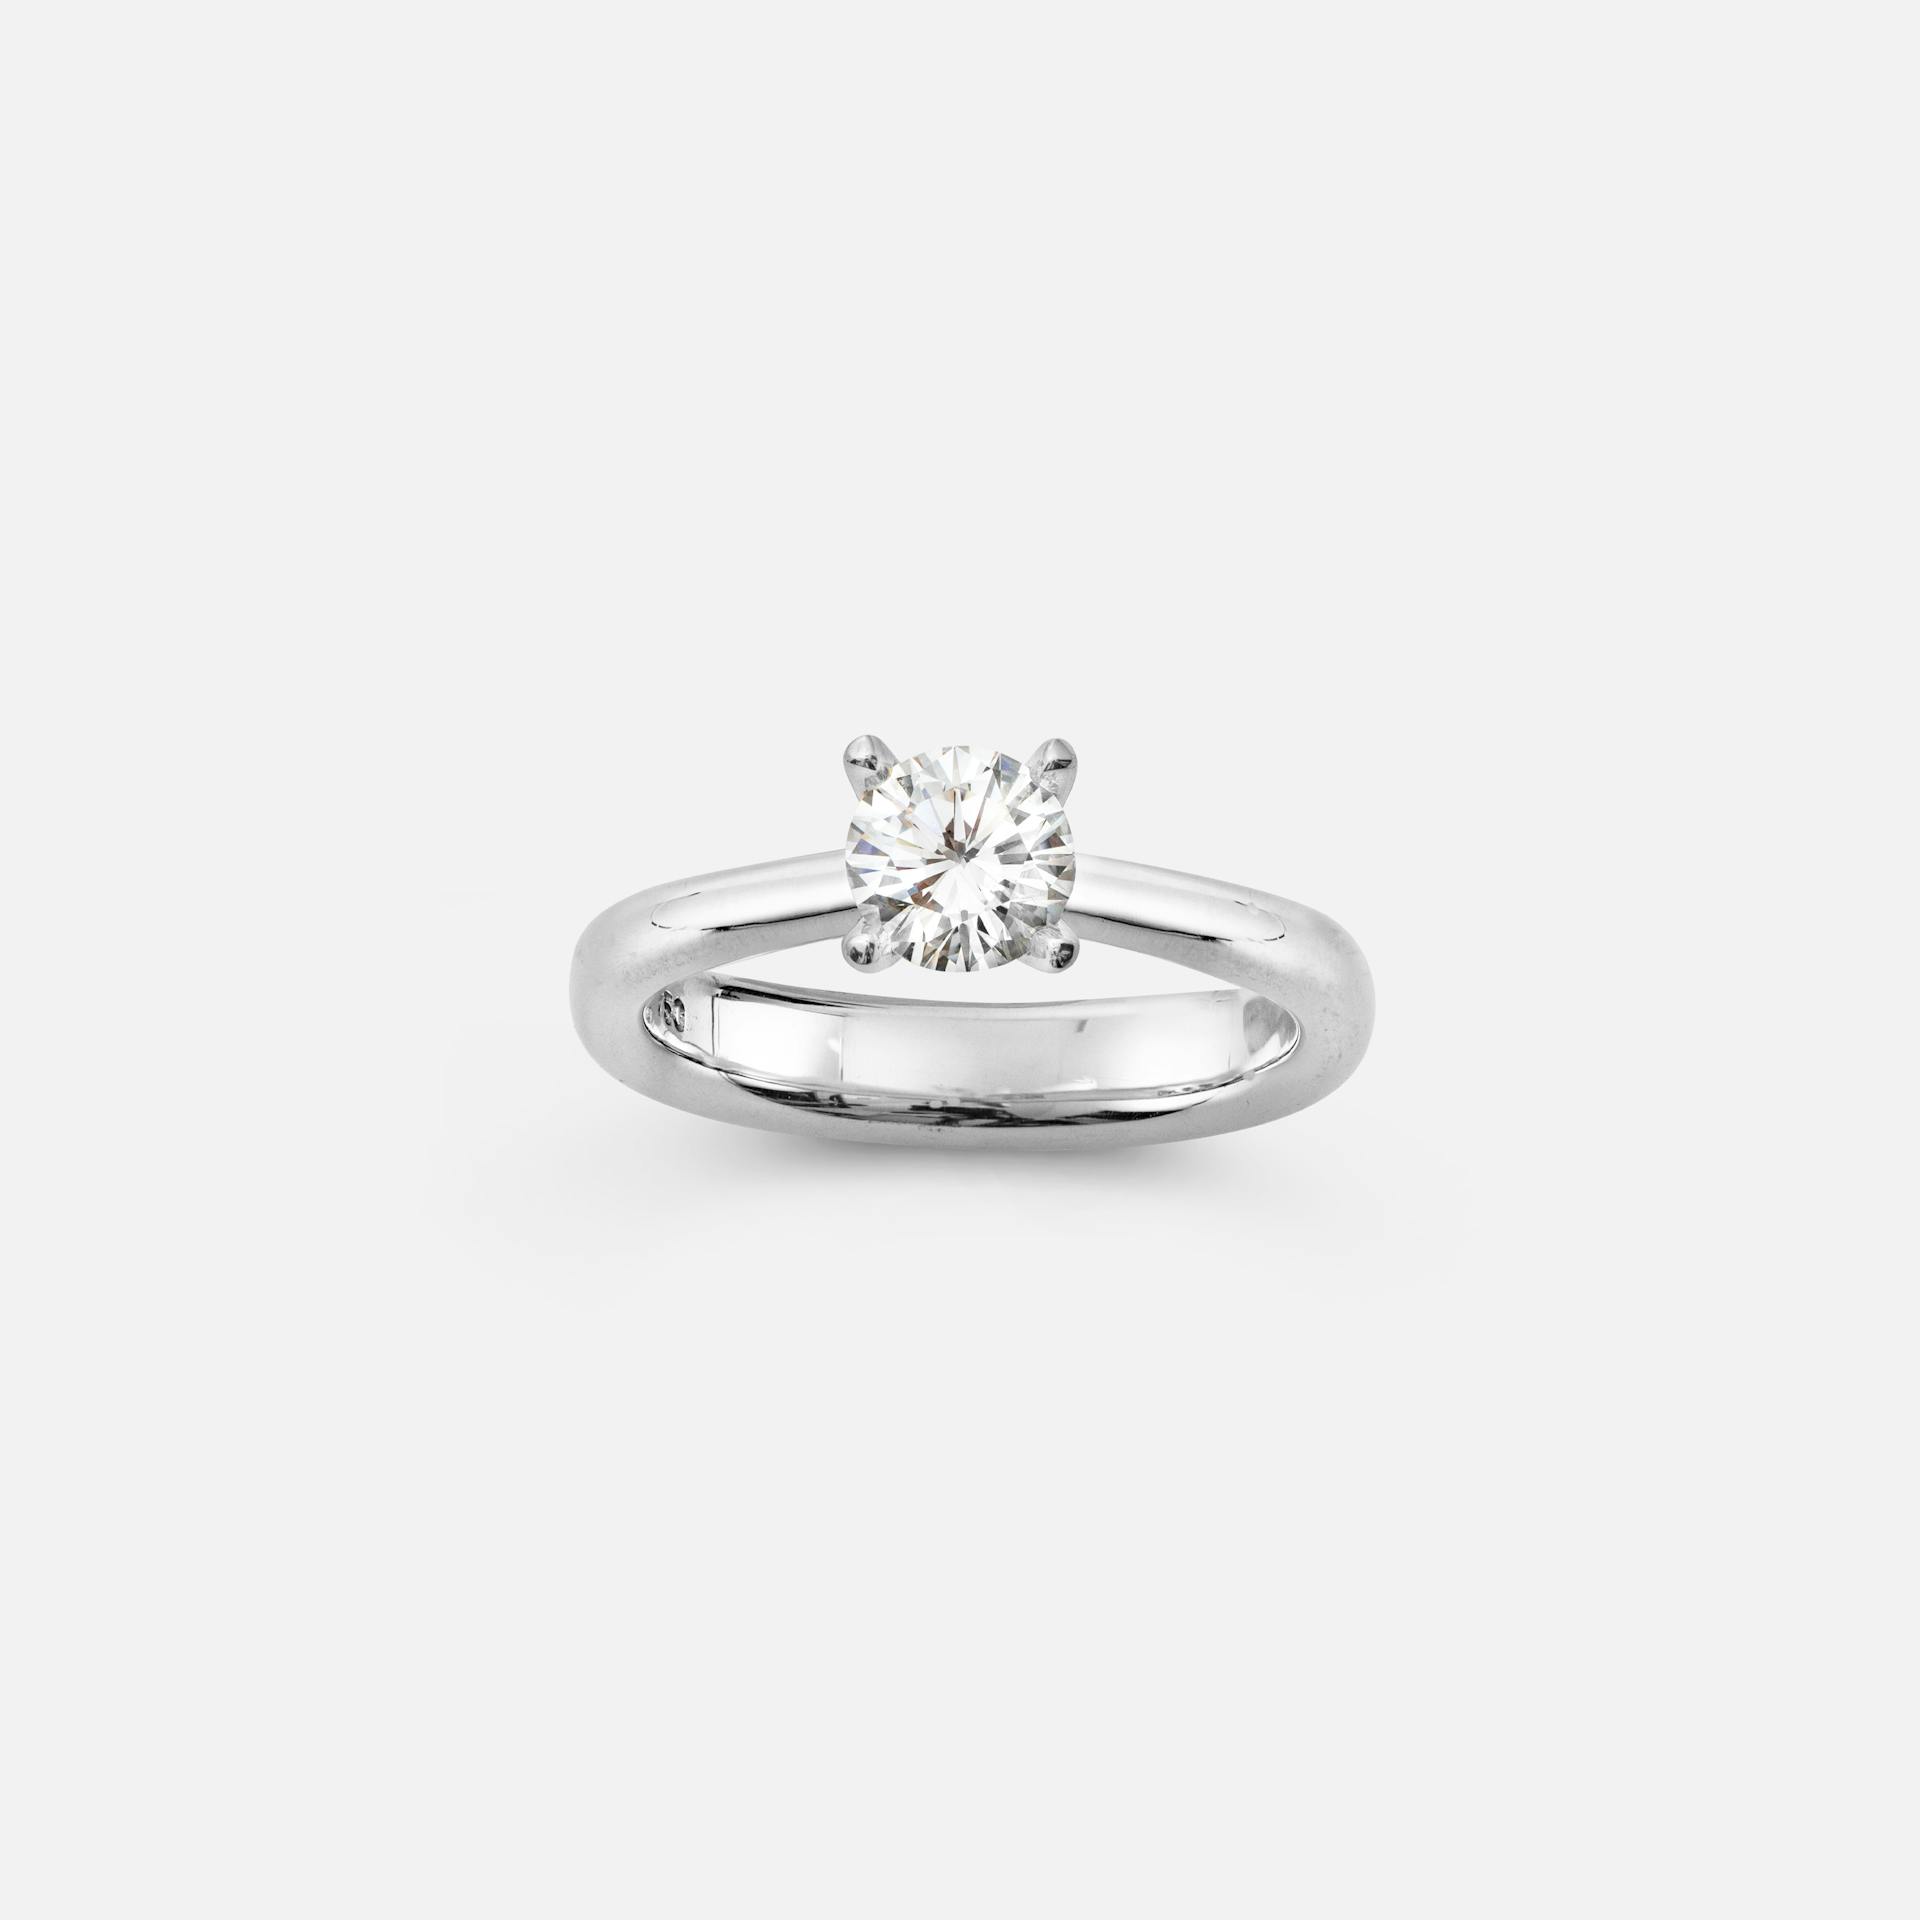 Winter Frost solitaire ring Dummy item for web - ring heavy solitaire WG 18k white gold set with a brilliant-cut diamond from 1.00 ct. TW.VS.
